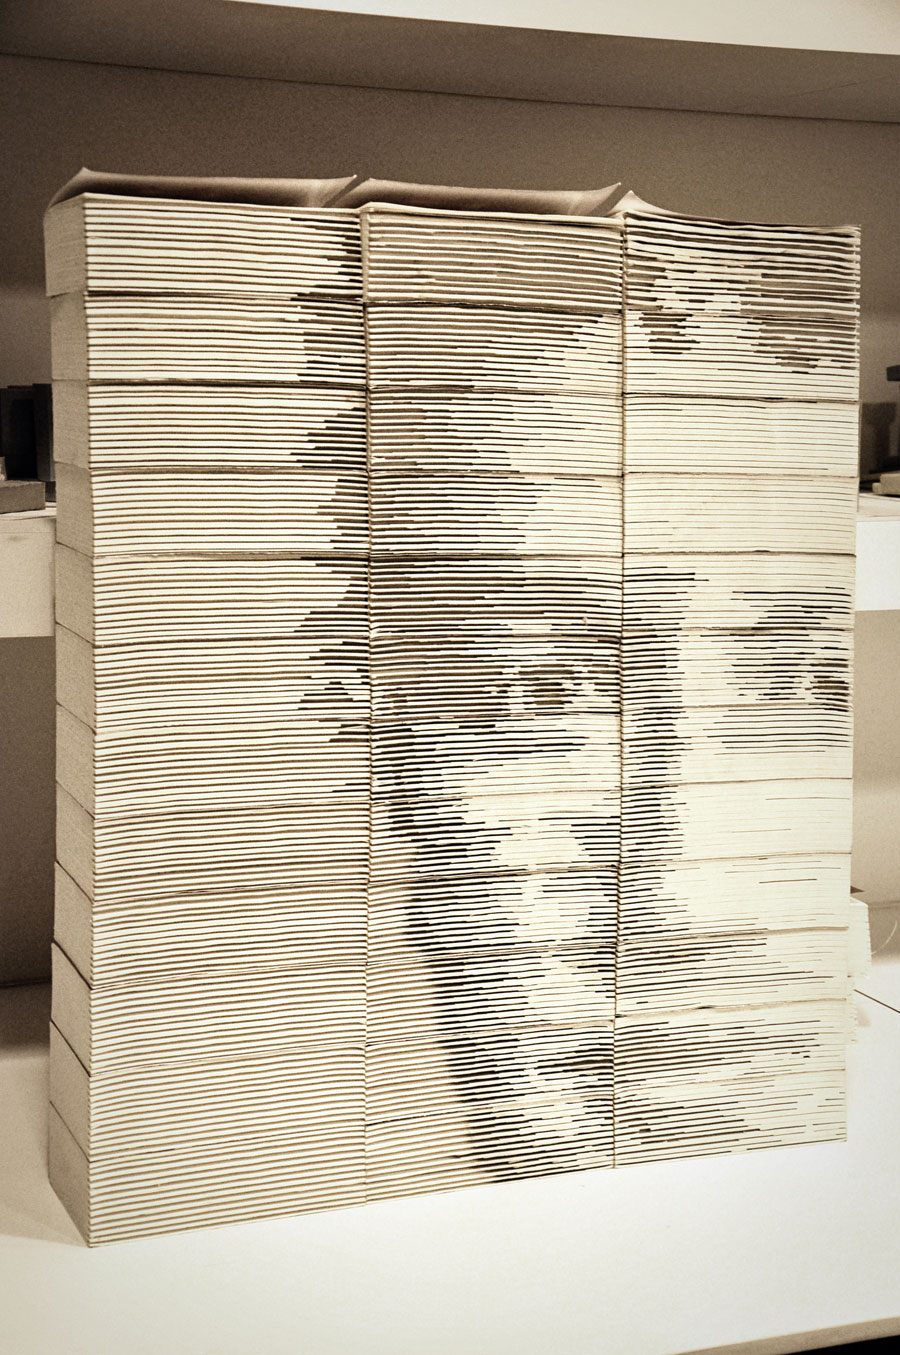 Mark Zuckerberg Portrait Created From Carved & Stacked Books